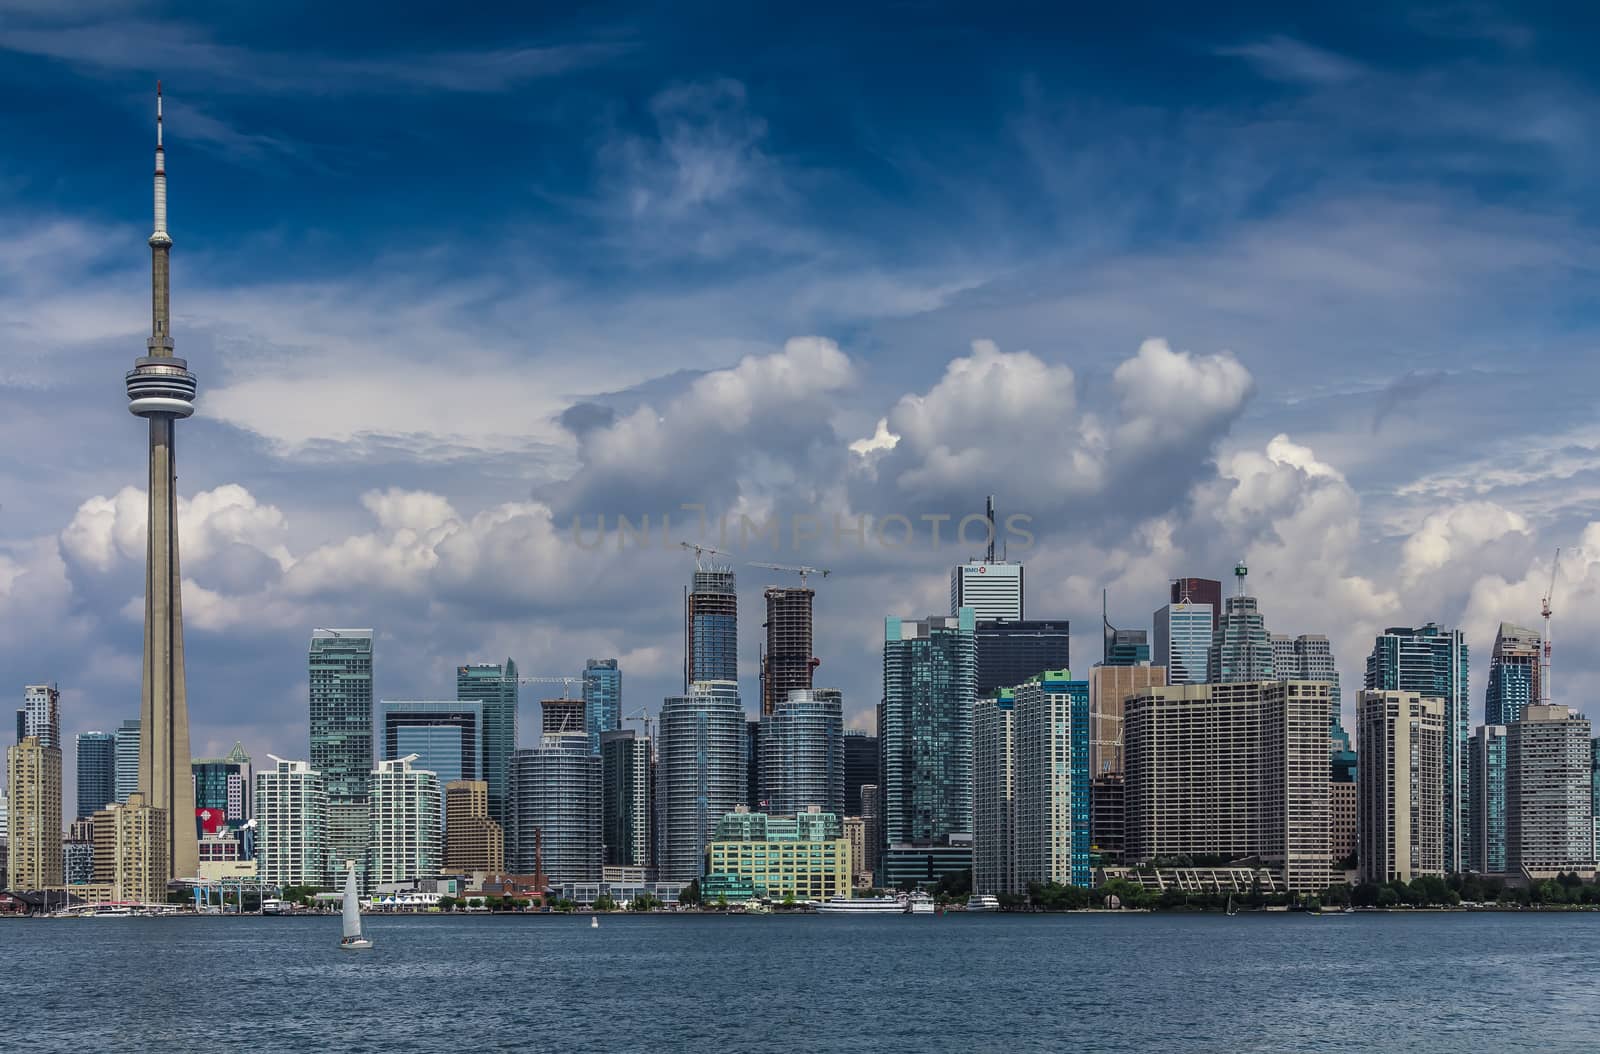 A view of Toronto City from an island on a cloudy day, Ontario, Canada.